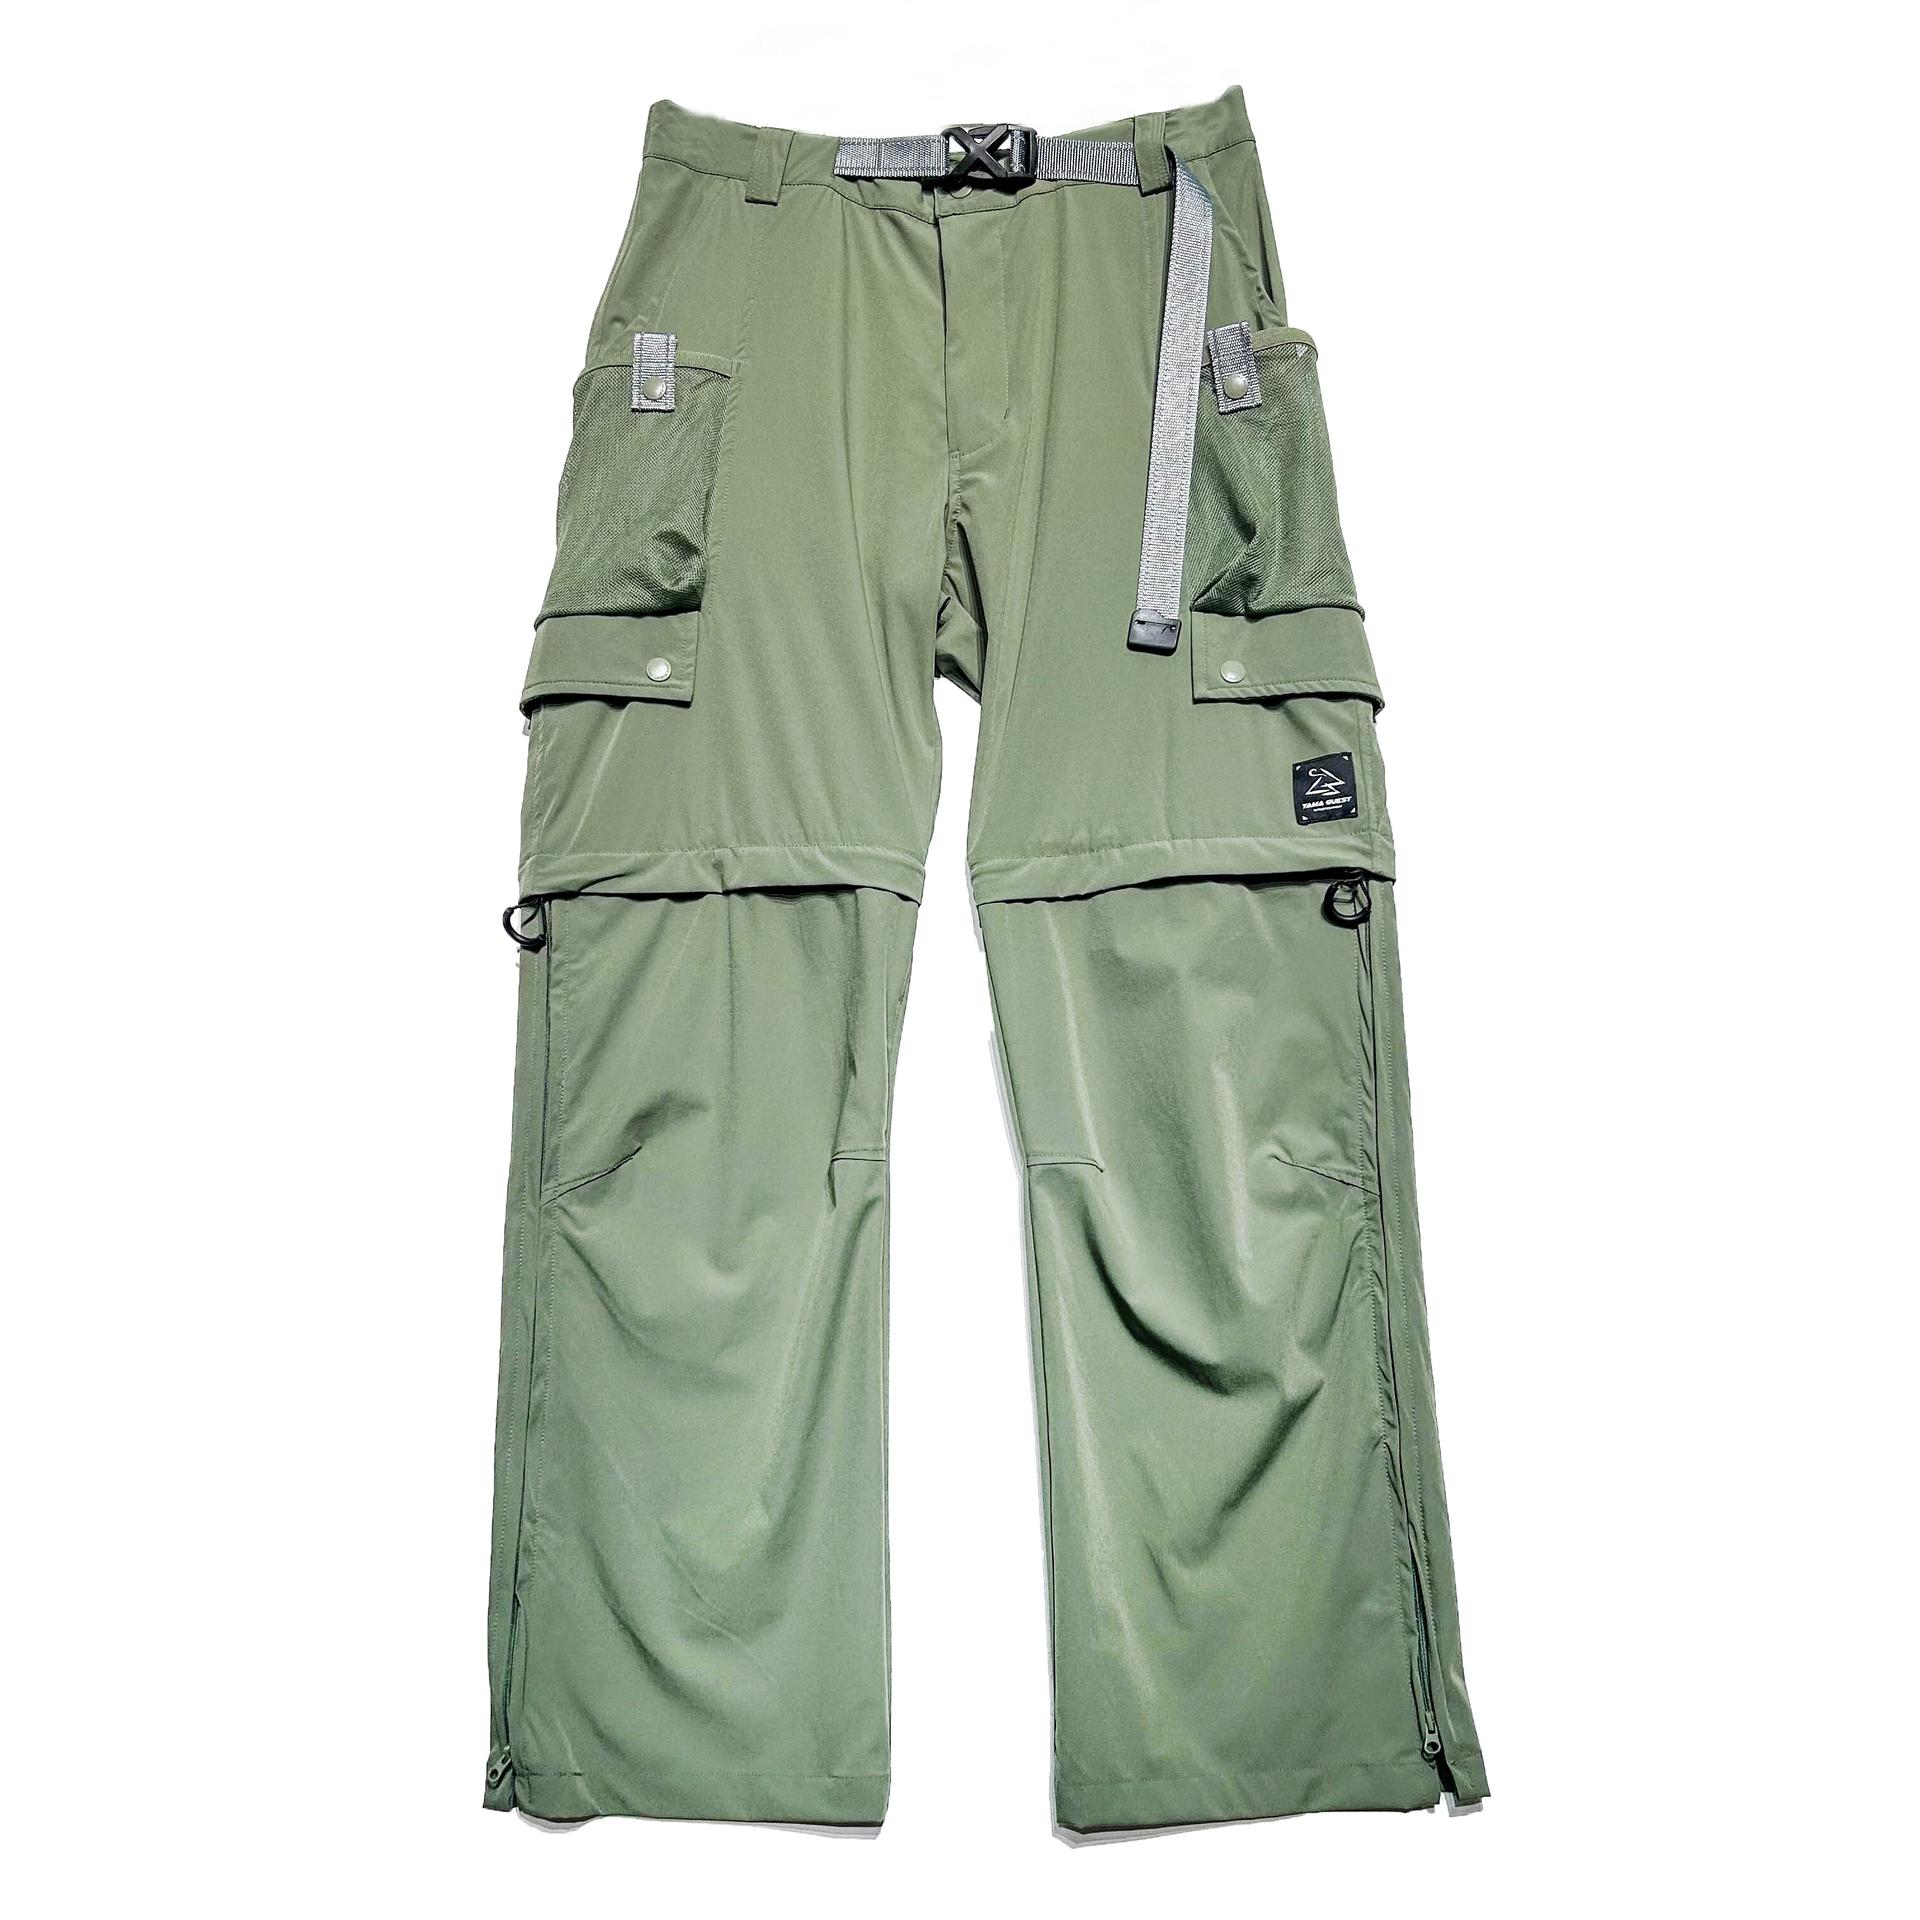 YamaGuest LP08 2-in-1 Outdoor Trousers (GRD)